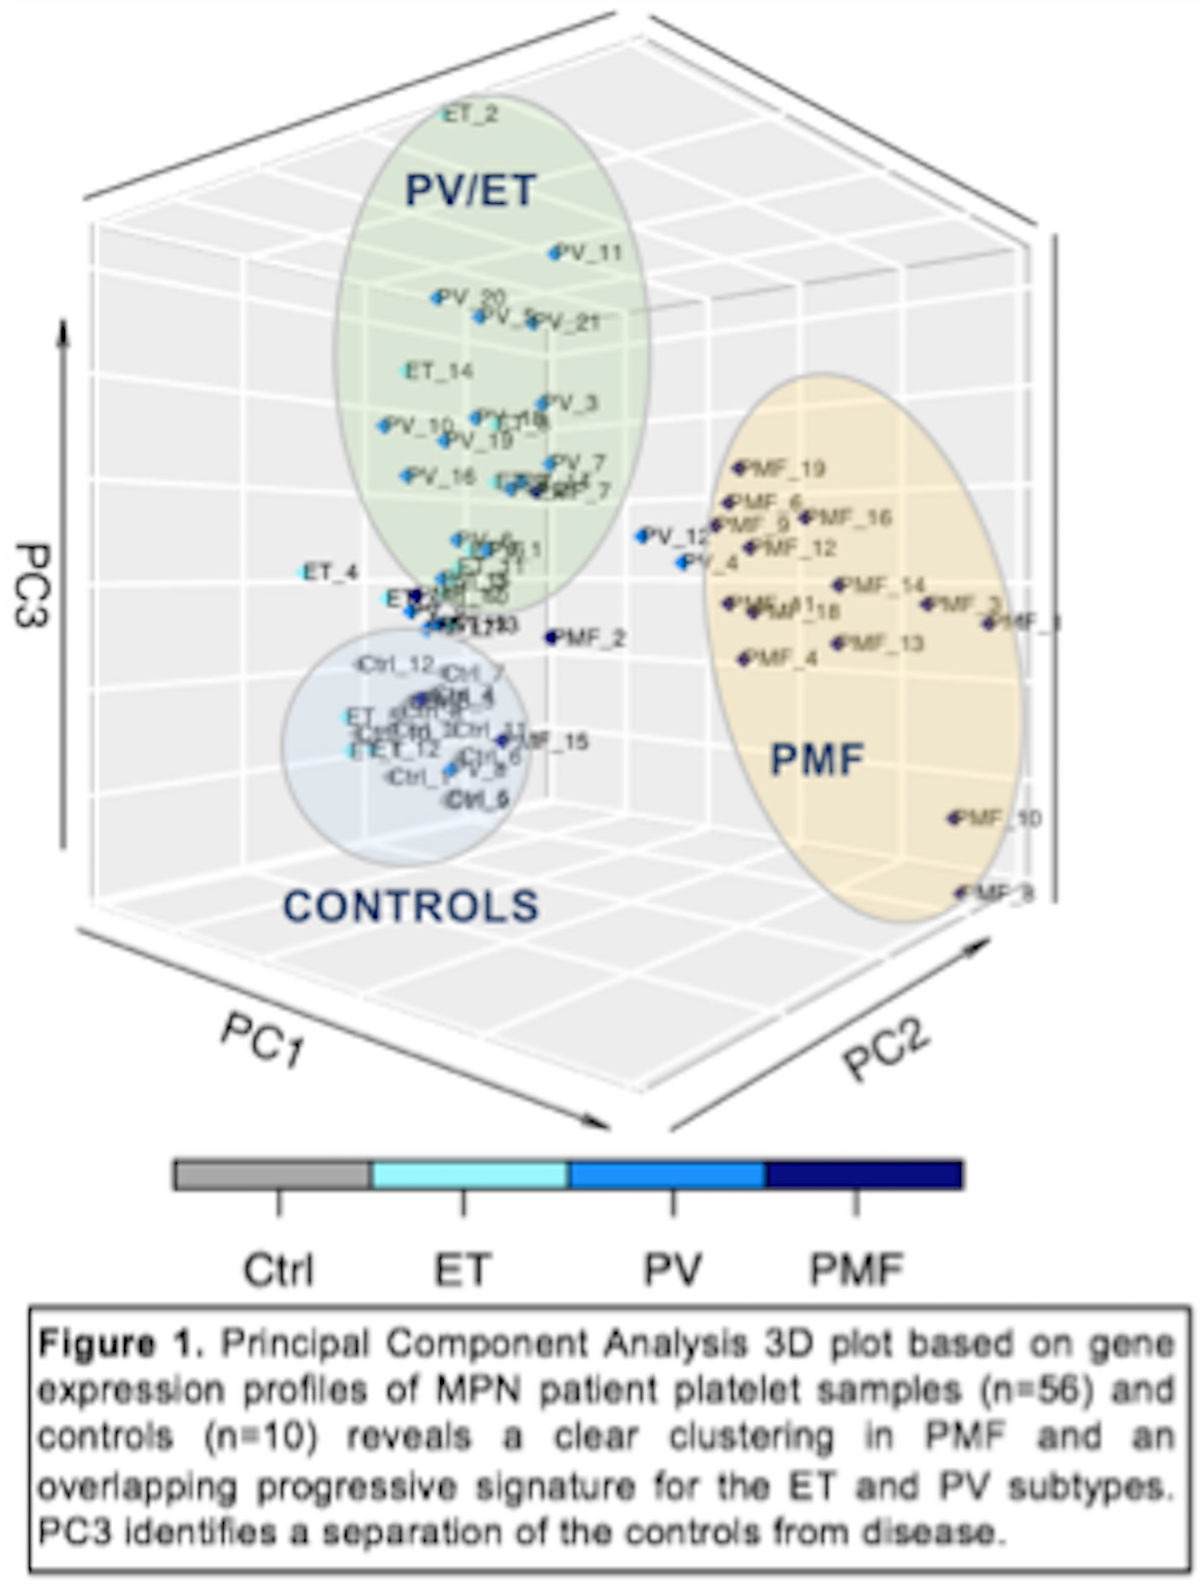 Figure1. Principal Component Analysis 3D plot based on gene expression profiles of MPN patient samples (n=56) and controls (n=10) reveals a clear clustering in PMF and an overlapping progressive signature for the ET and PV subtypes. PC3 identifies a separation of the controls from disease.